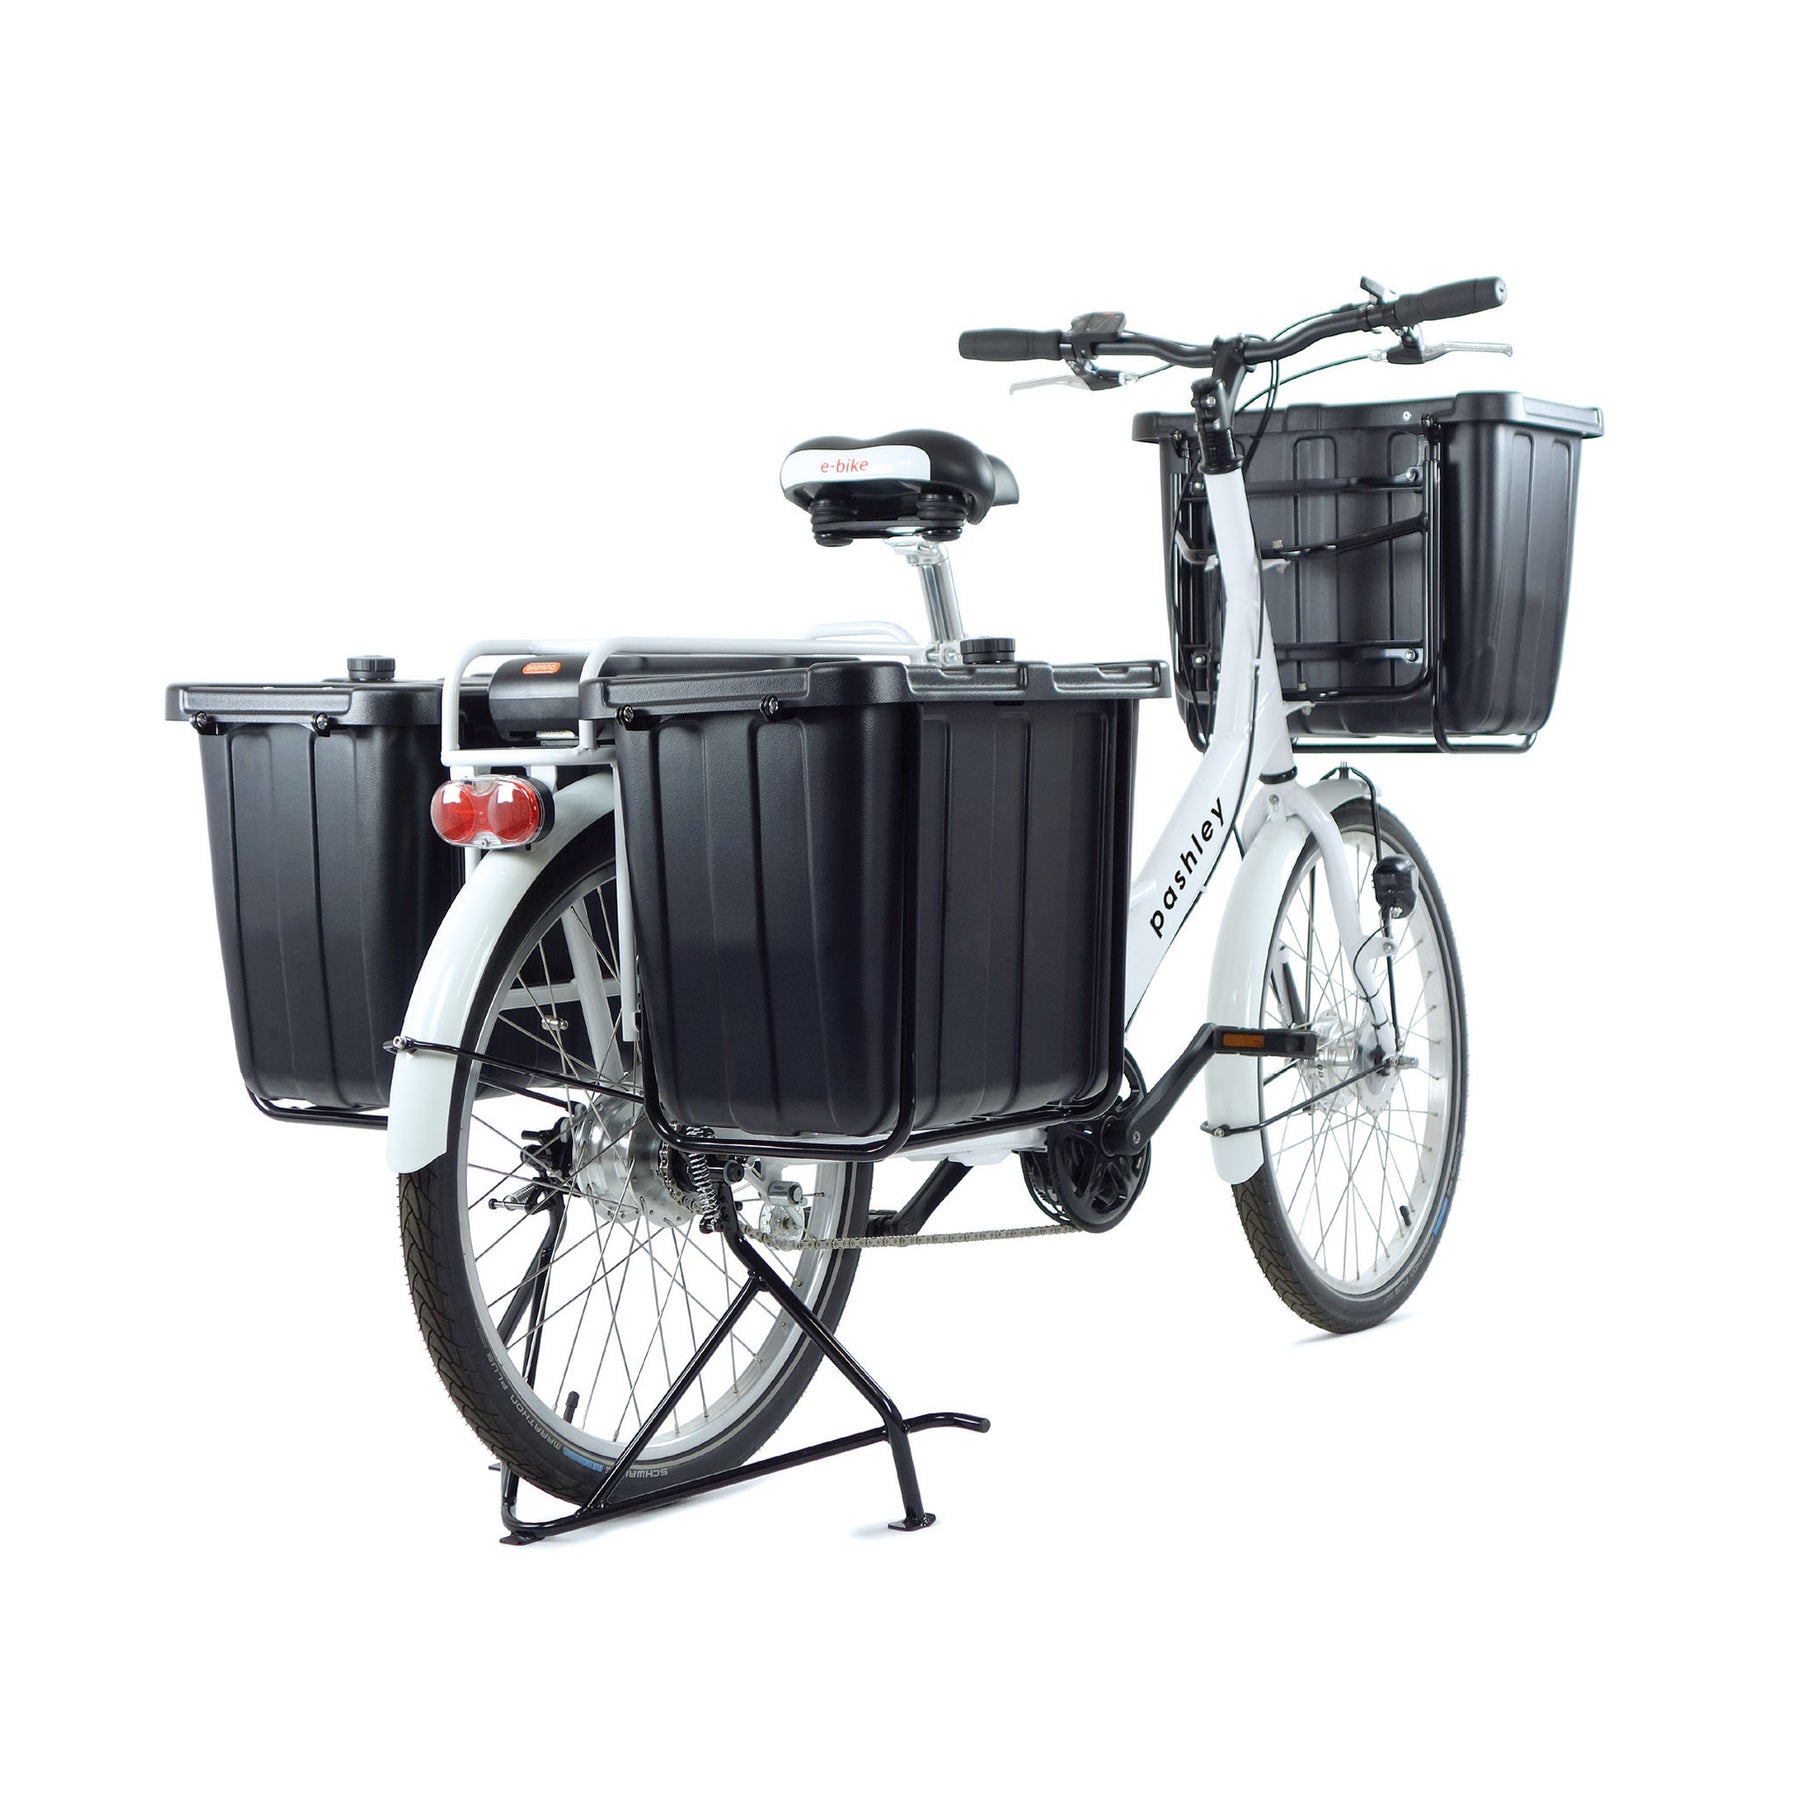 Pashley electric carg obike with large front and rear cargo boxes and tripod propstand. - rear view showing rear light.